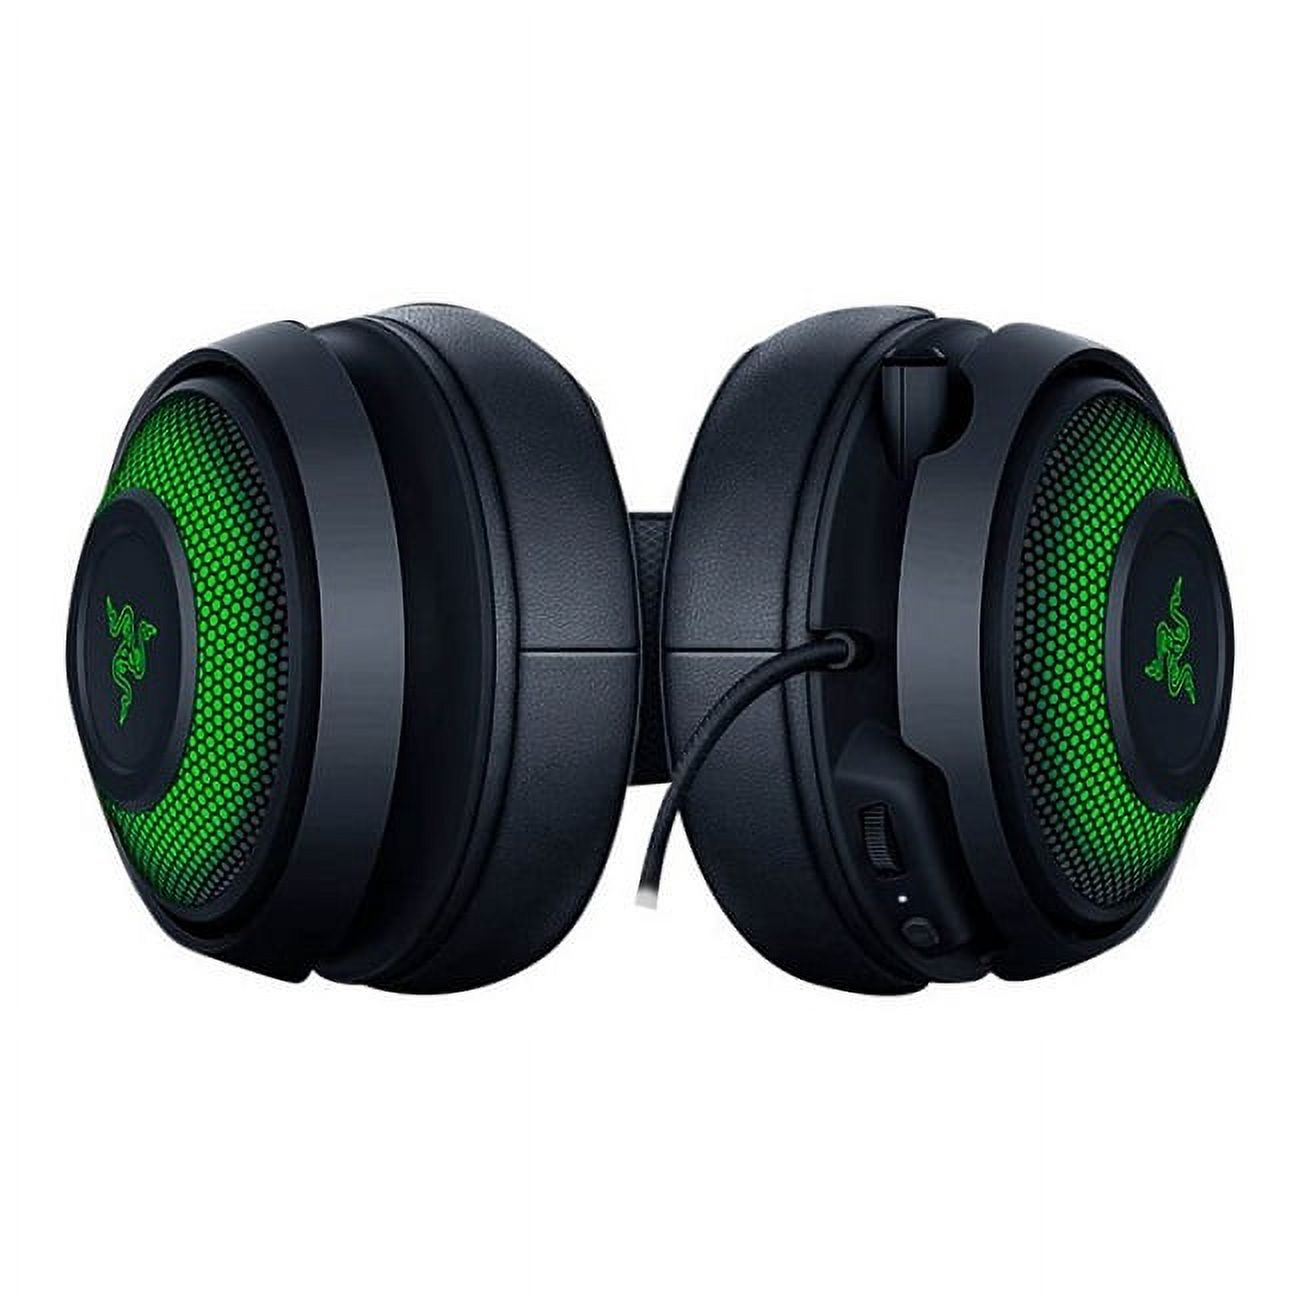 Razer Kraken Ultimate USB Surround Sound Headset with ANC Microphone - image 3 of 3